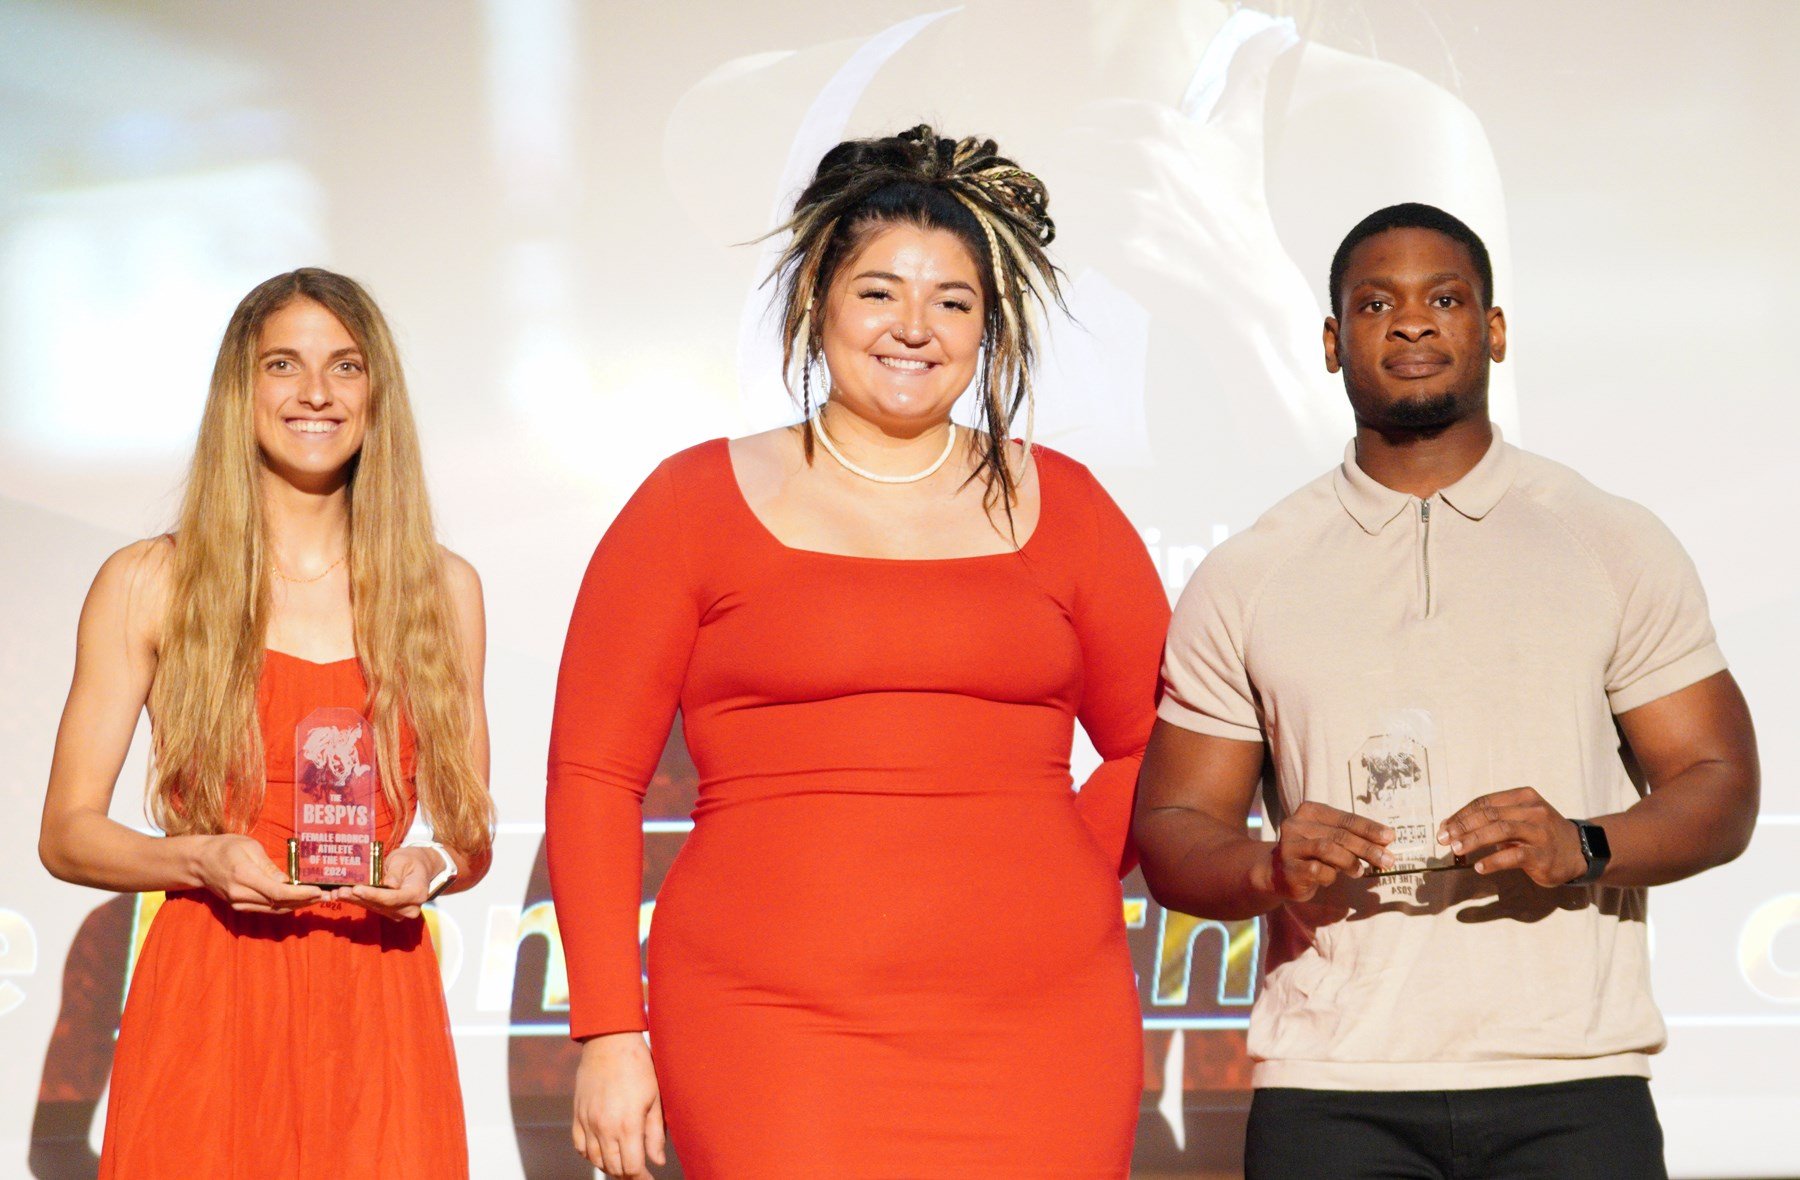  Hastings College student-athletes, teams recognized at BESPY Awards 